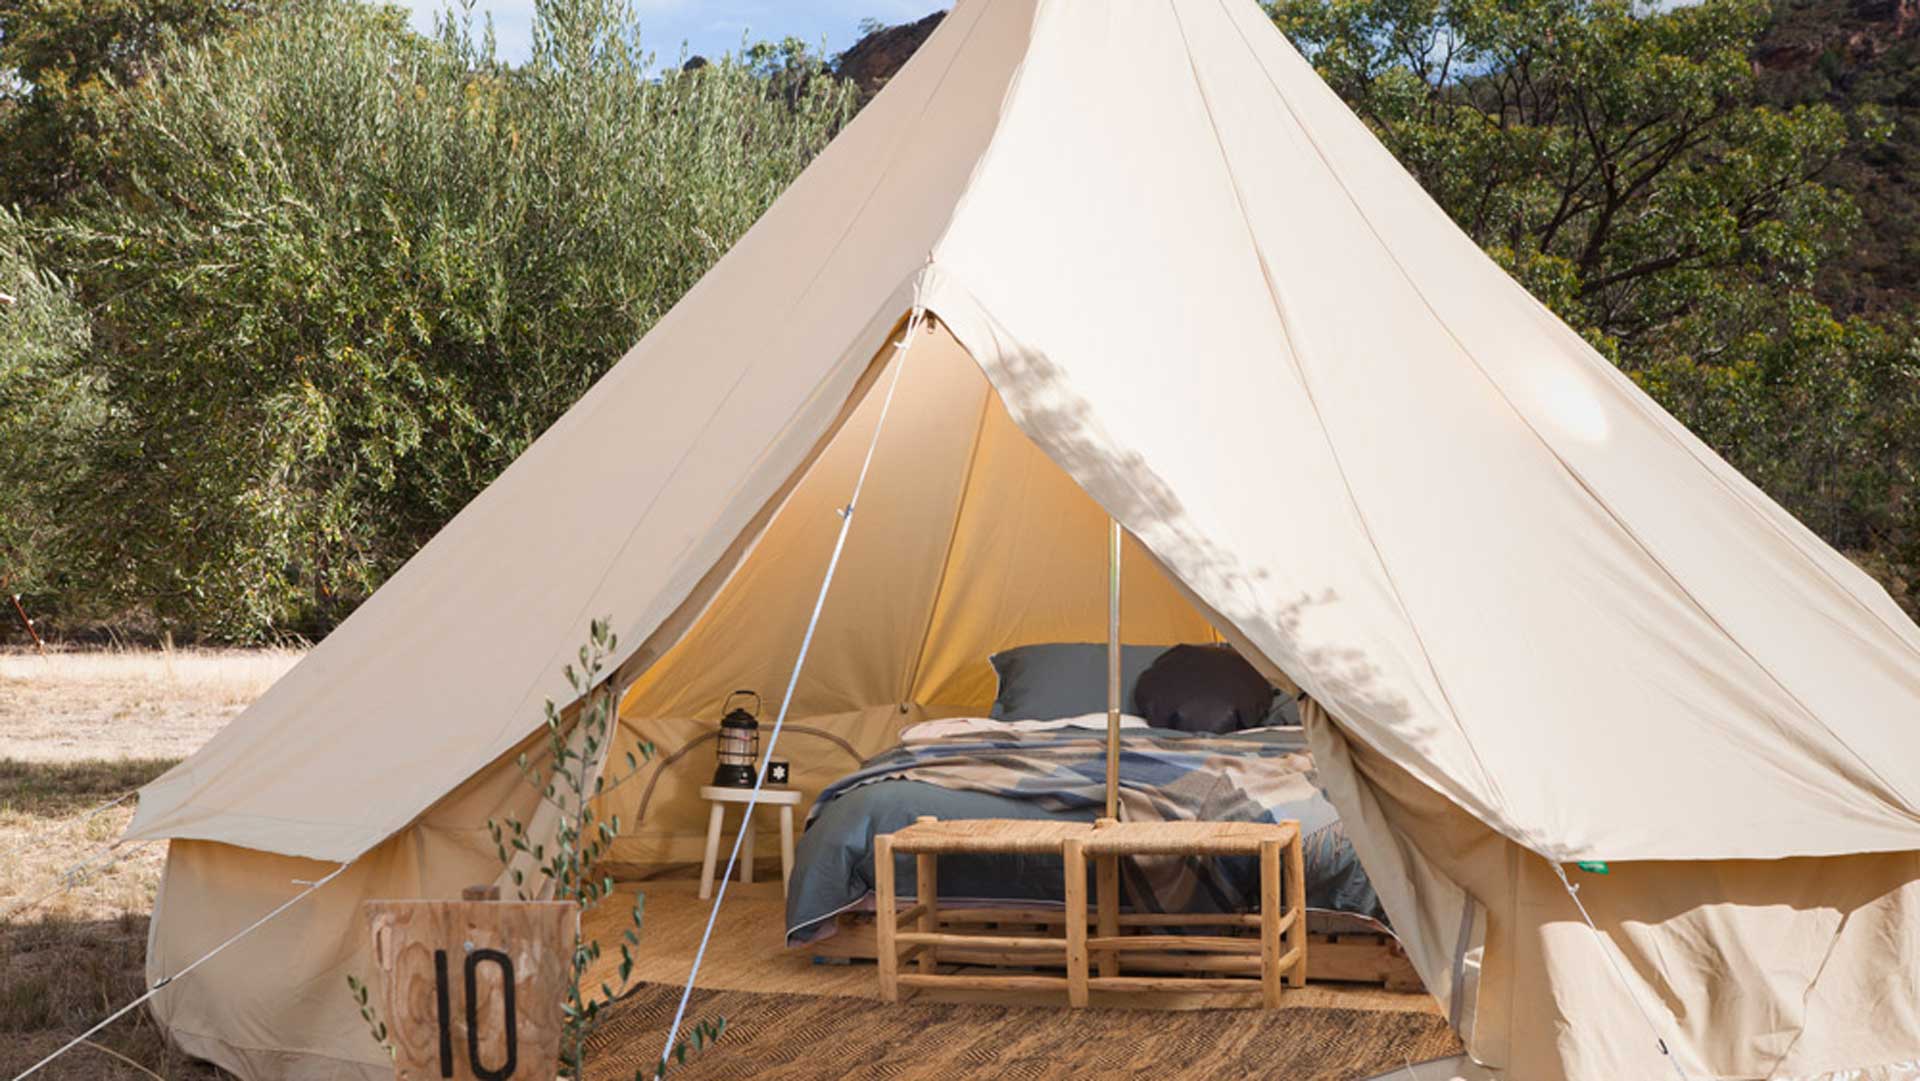 Two New Glamping Retreats Are Popping Up in Victorian National Parks